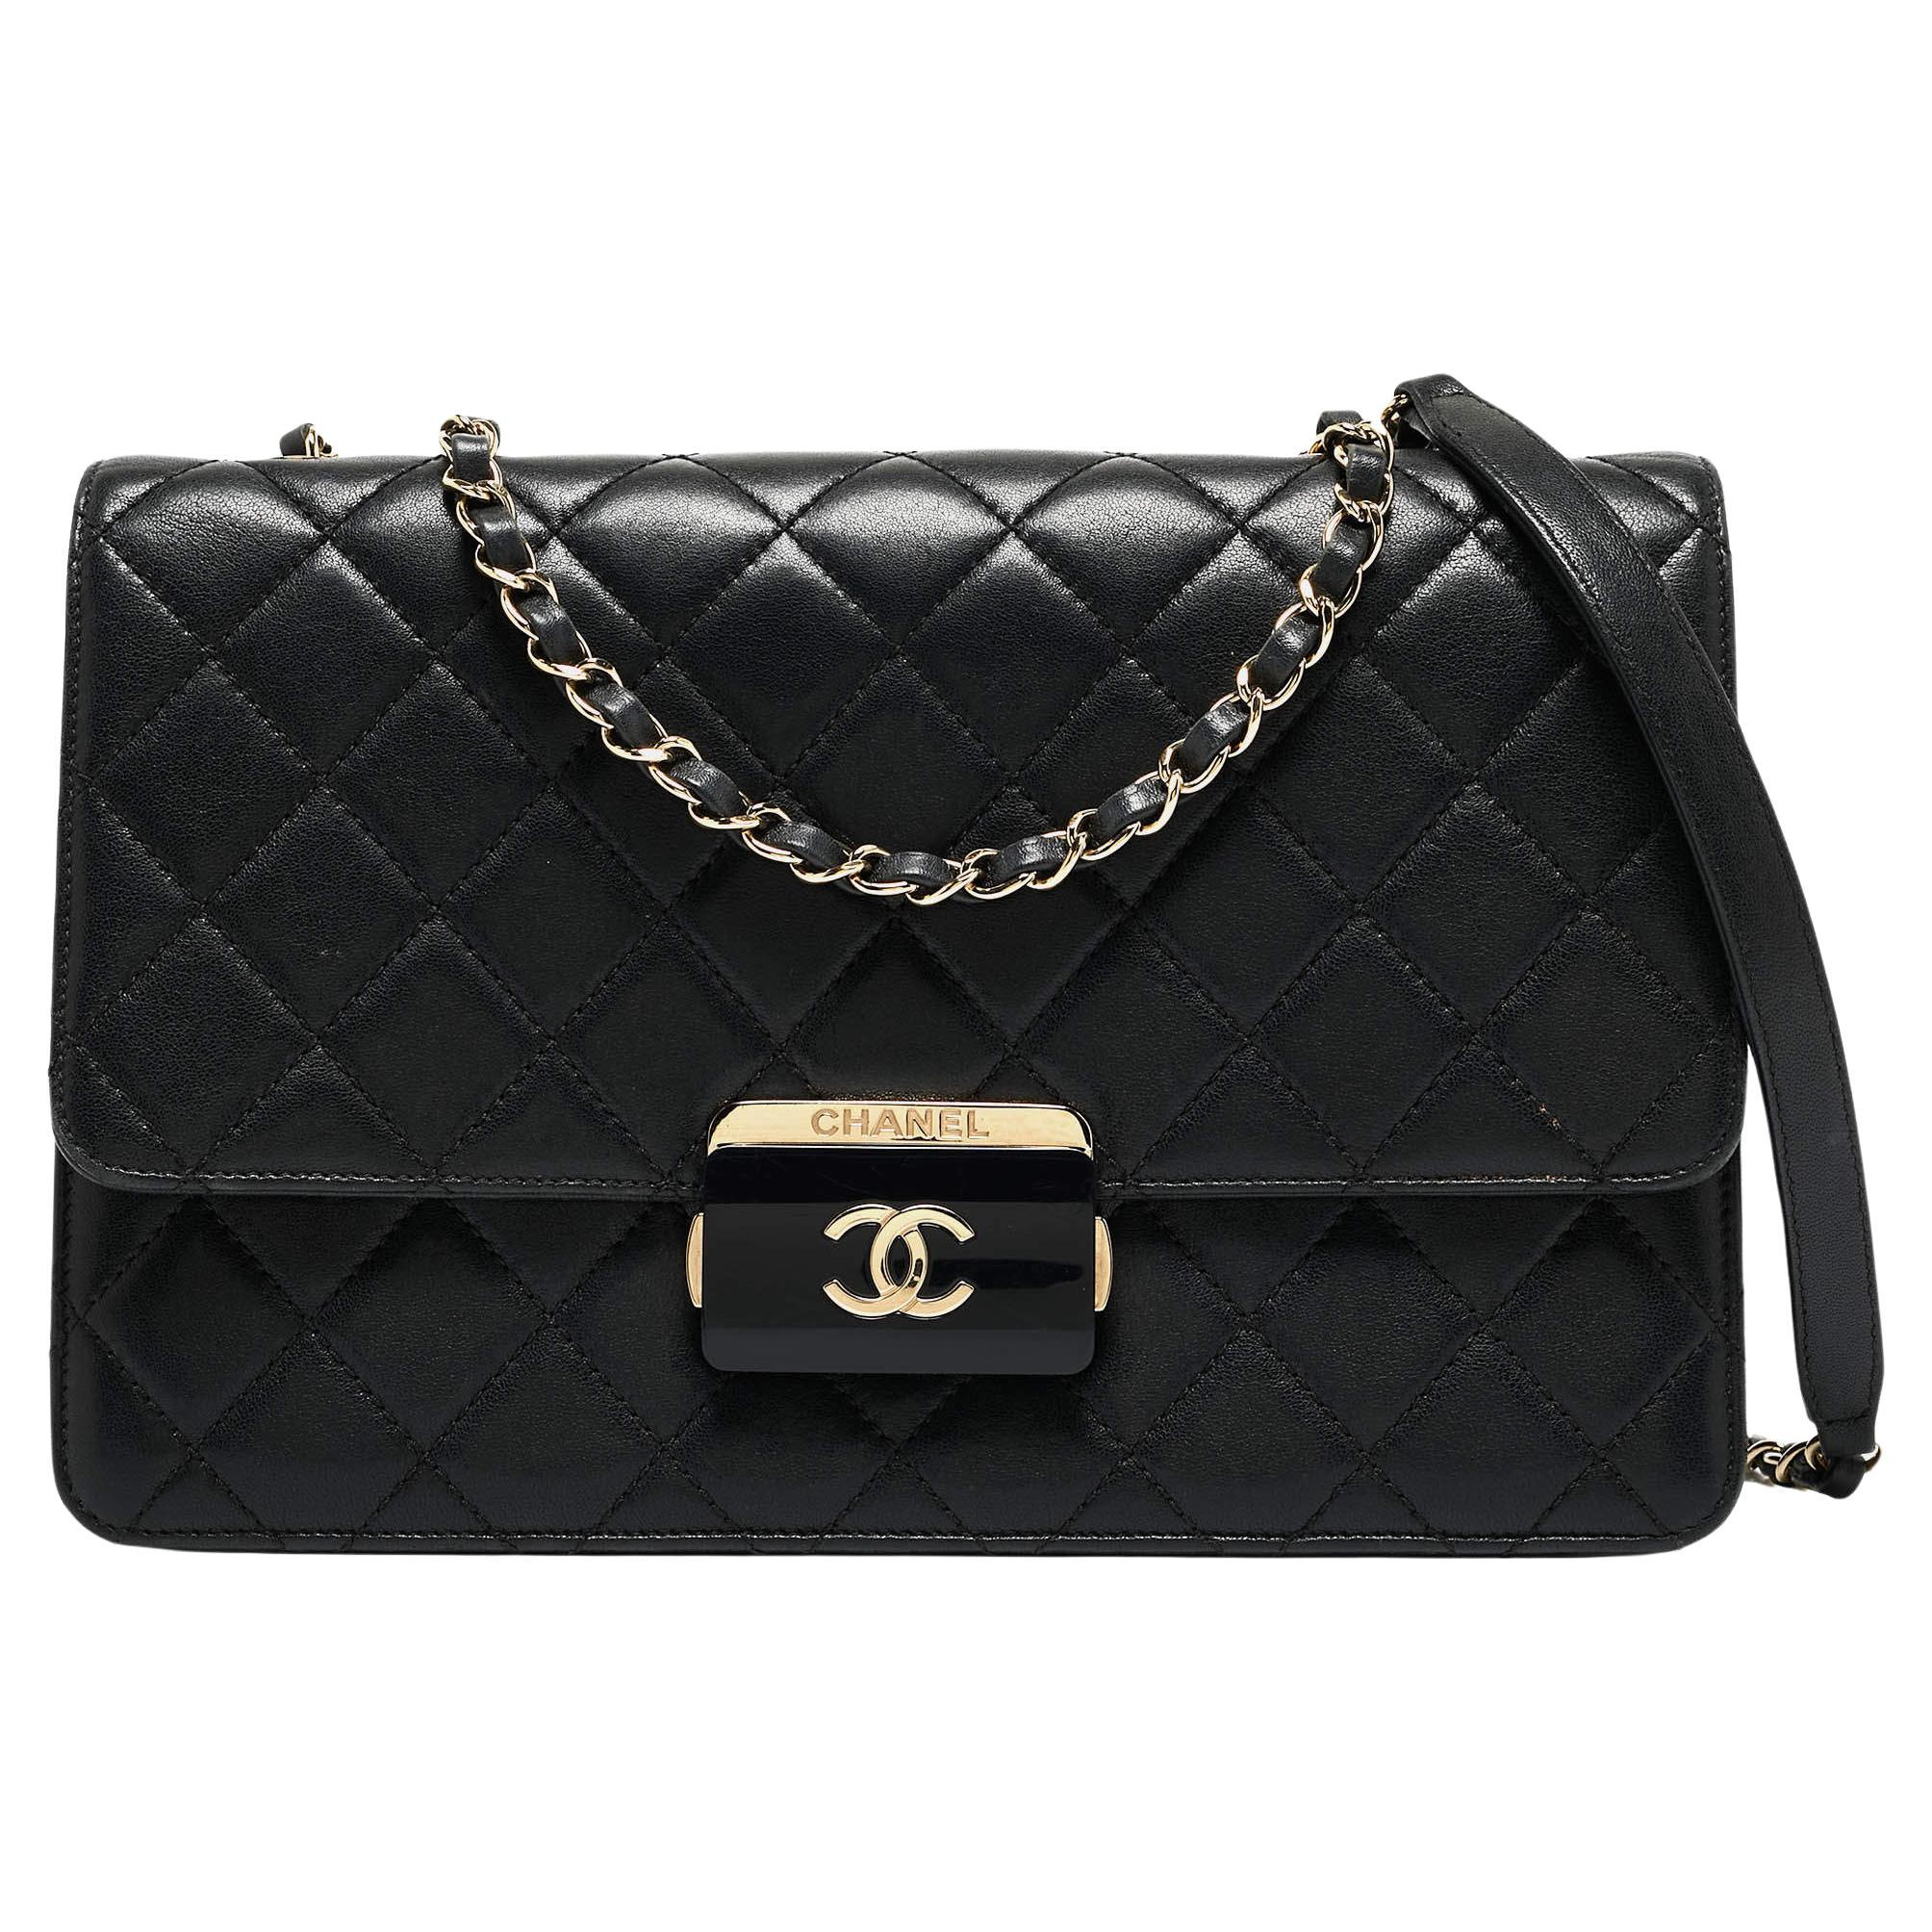 Chanel Black Quilted Leather Beauty Lock Flap Bag